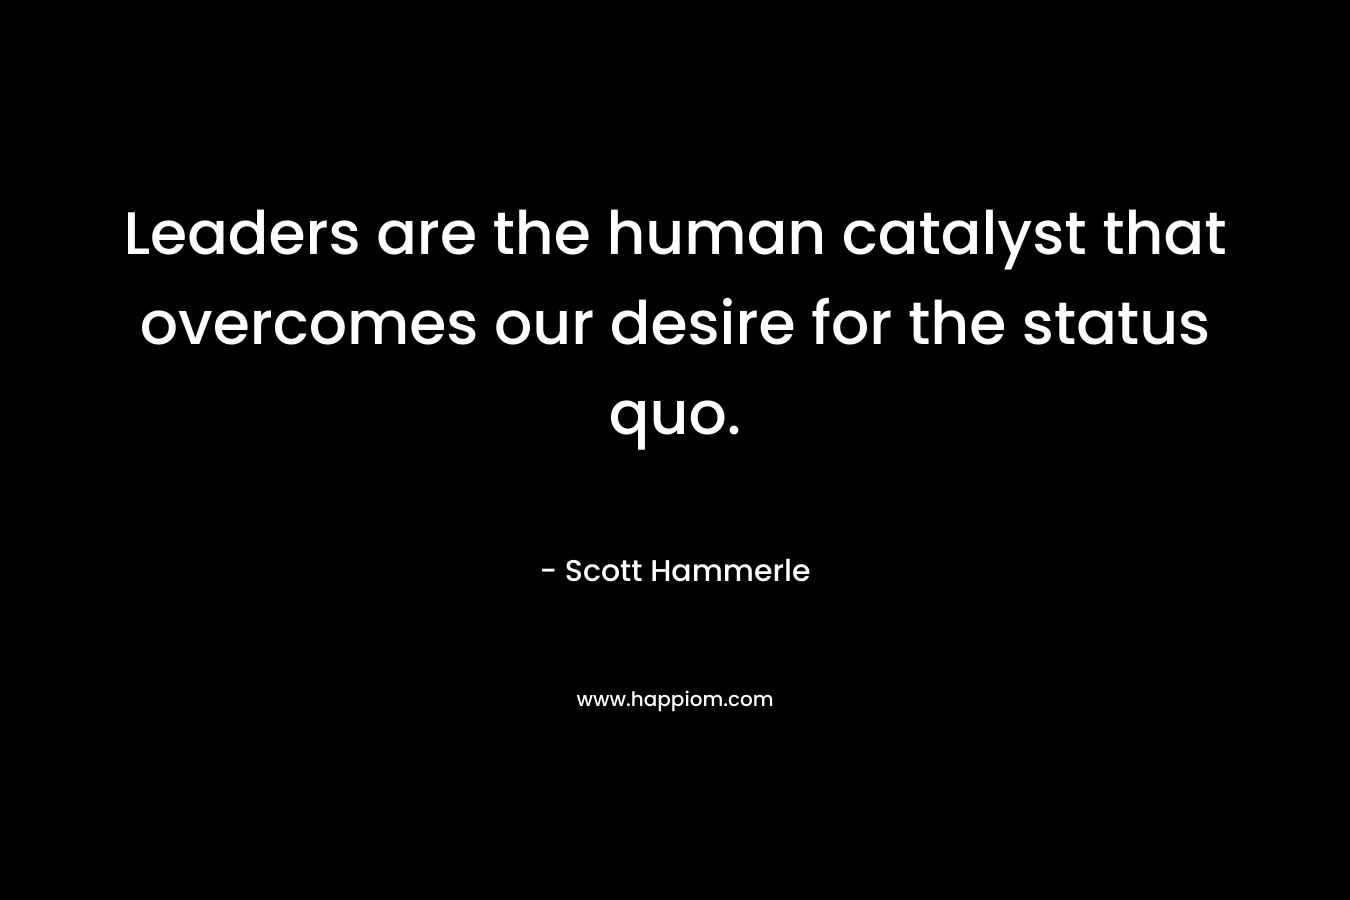 Leaders are the human catalyst that overcomes our desire for the status quo.